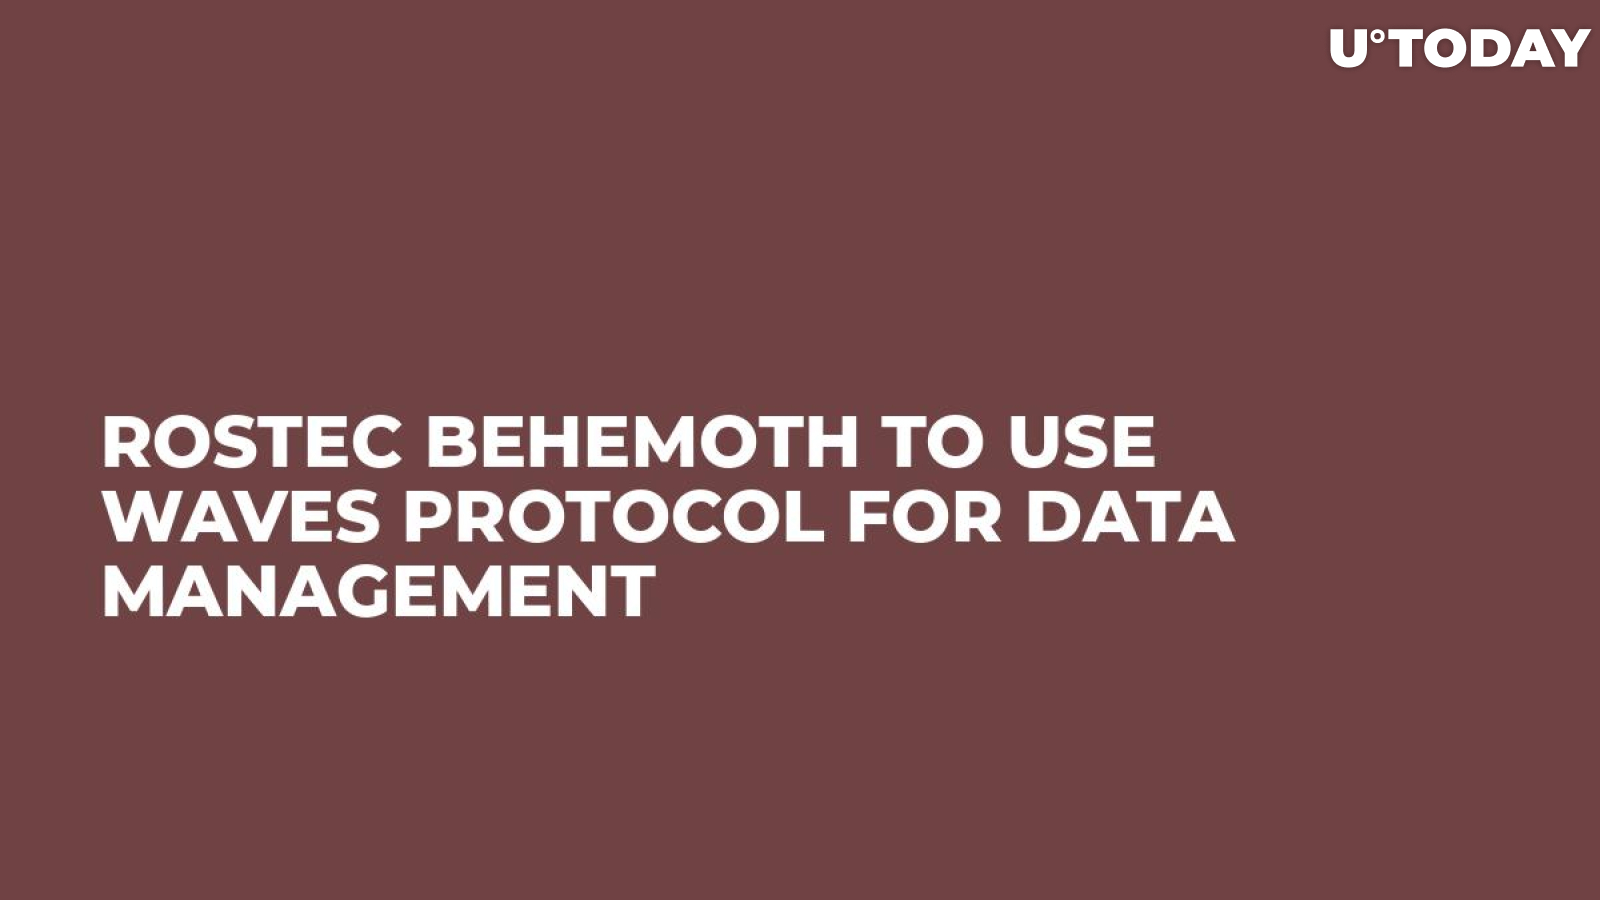 Rostec Behemoth to Use Waves Protocol For Data Management